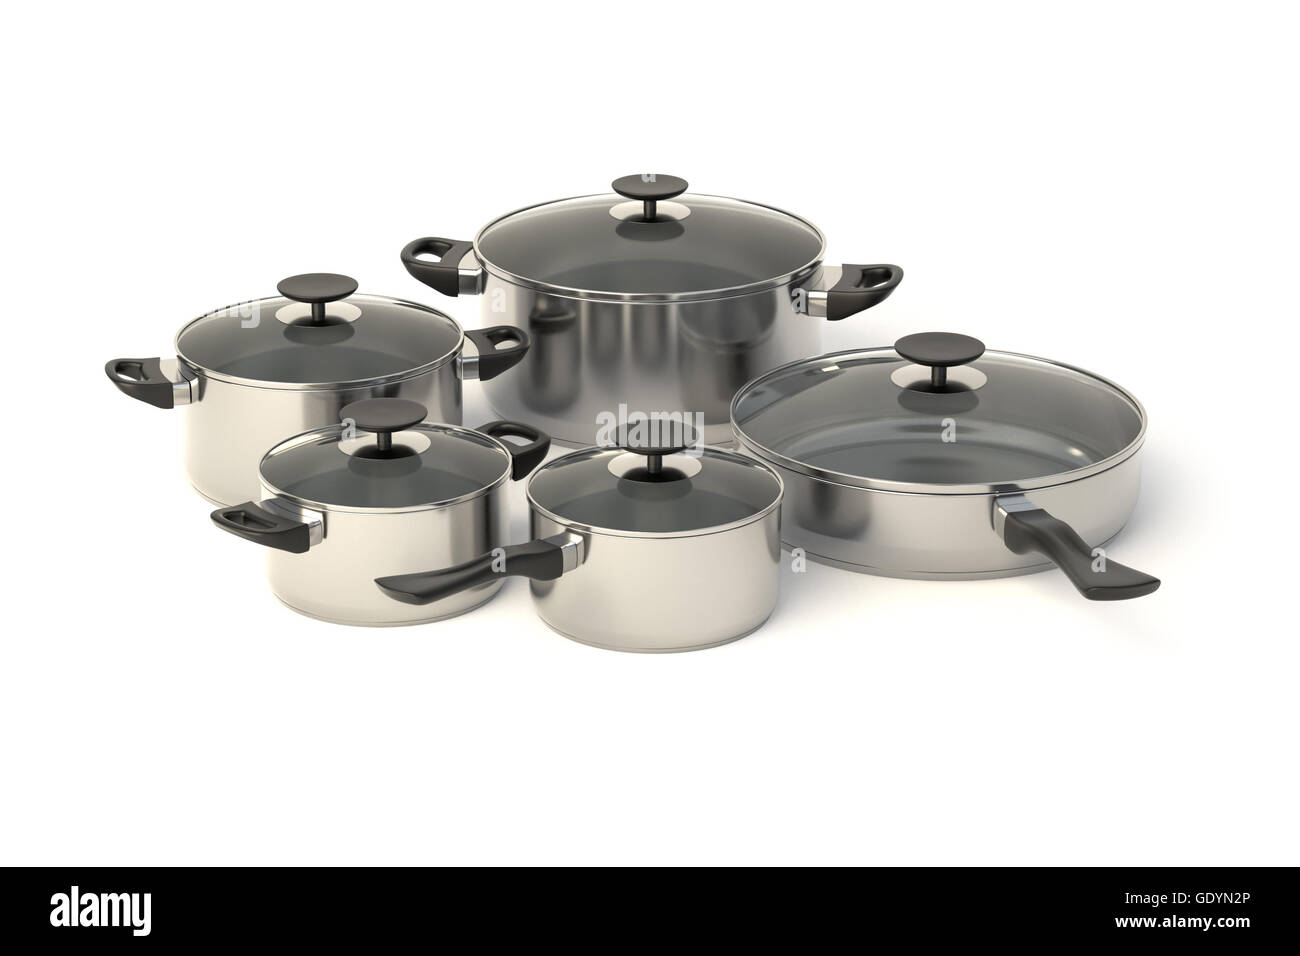 https://c8.alamy.com/comp/GDYN2P/stainless-steel-pots-and-pans-on-white-background-set-of-five-cooking-GDYN2P.jpg